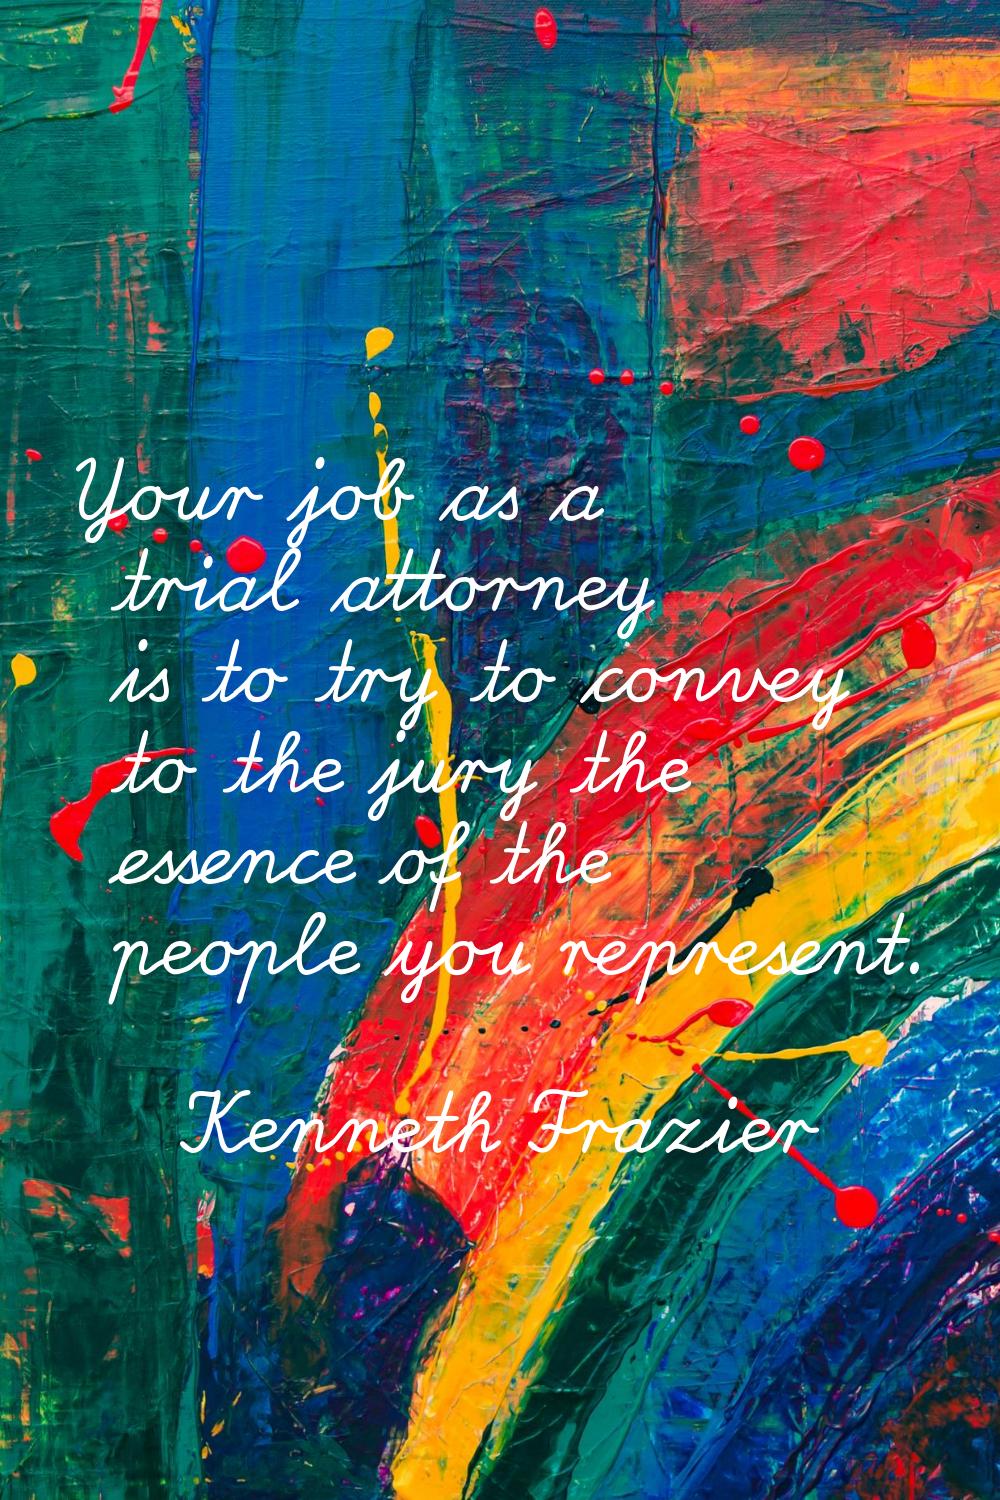 Your job as a trial attorney is to try to convey to the jury the essence of the people you represen